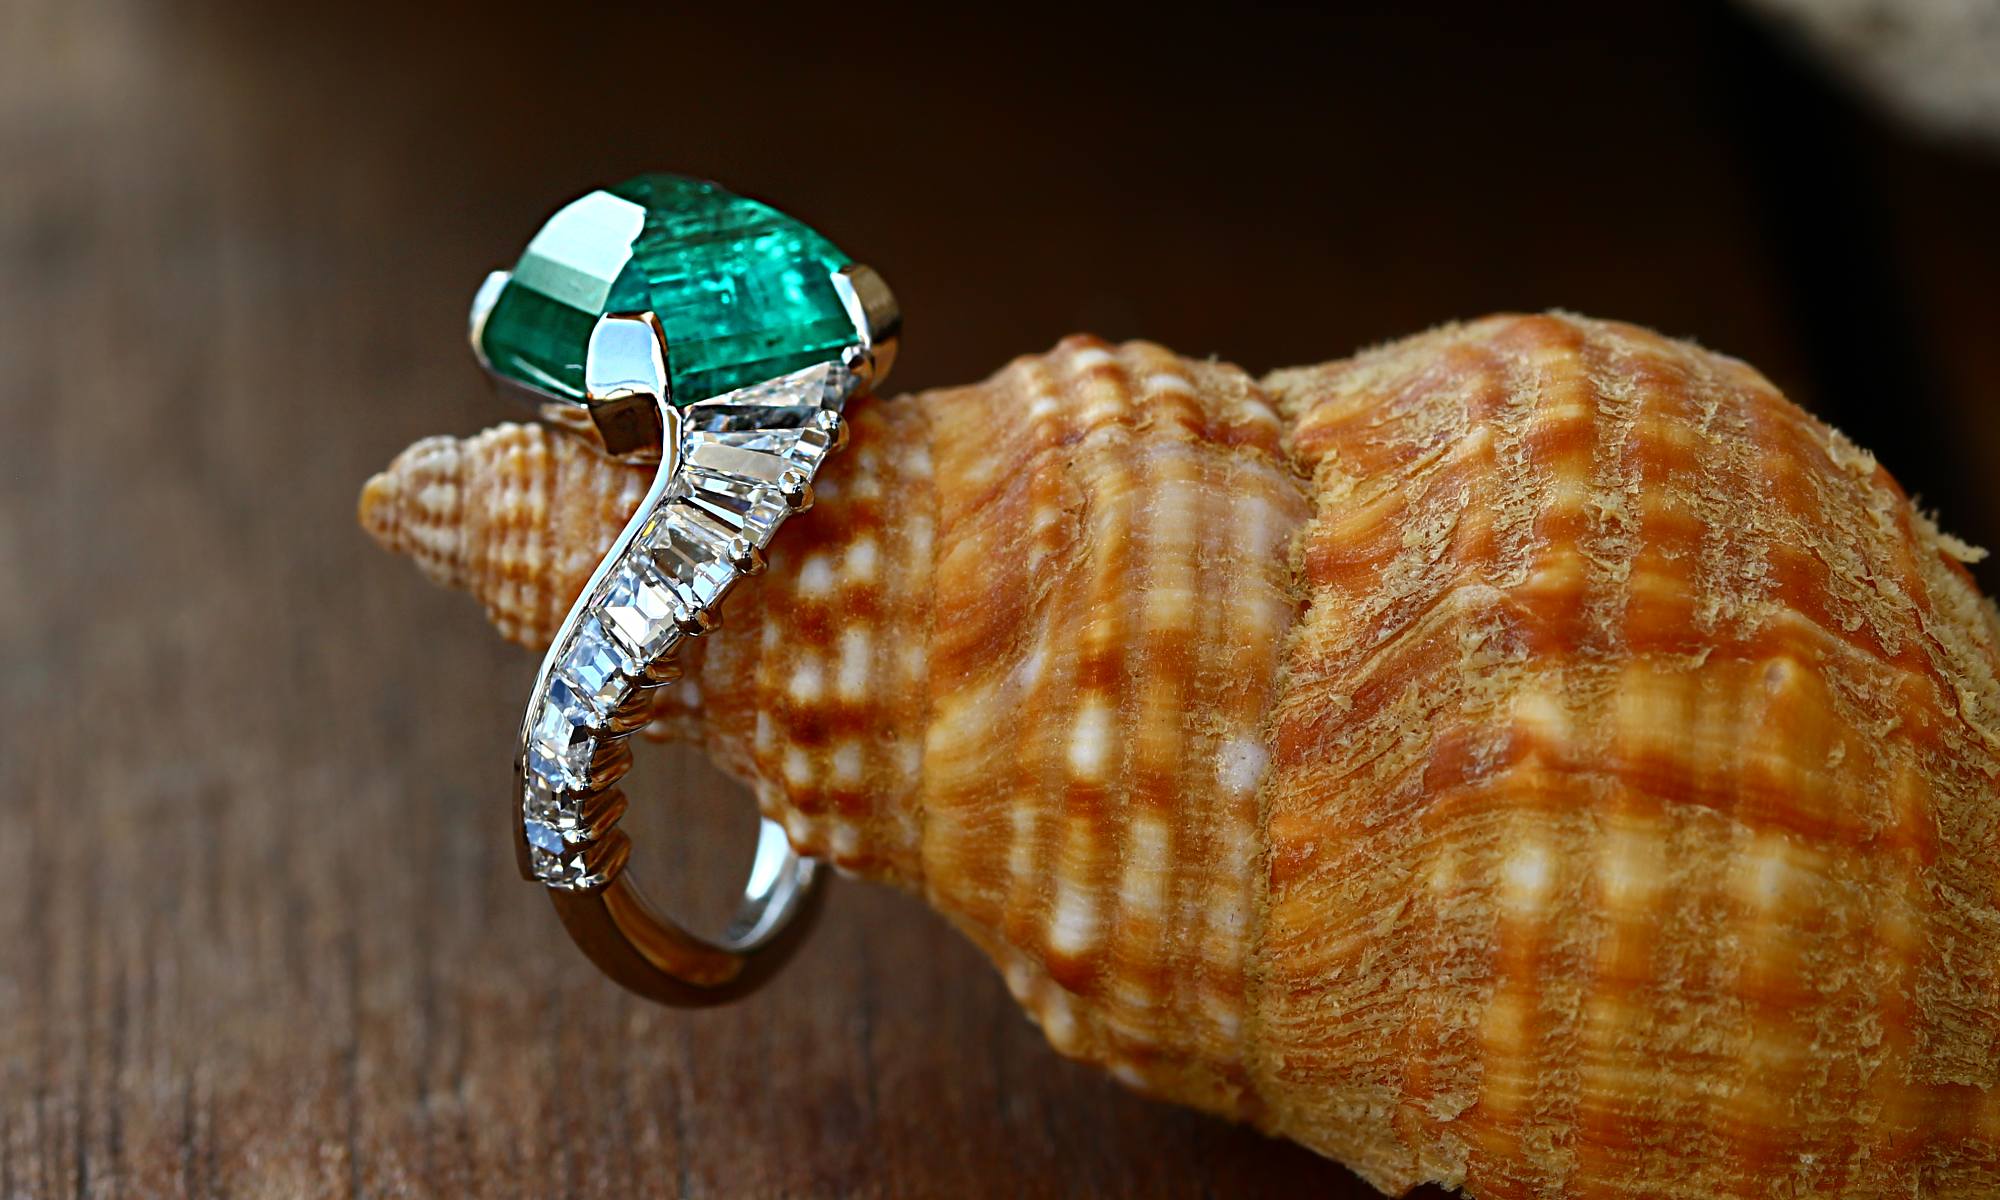 Antique Emerald Pinky Ring Spiraled by Nine Unique Historic Diamond Cuts